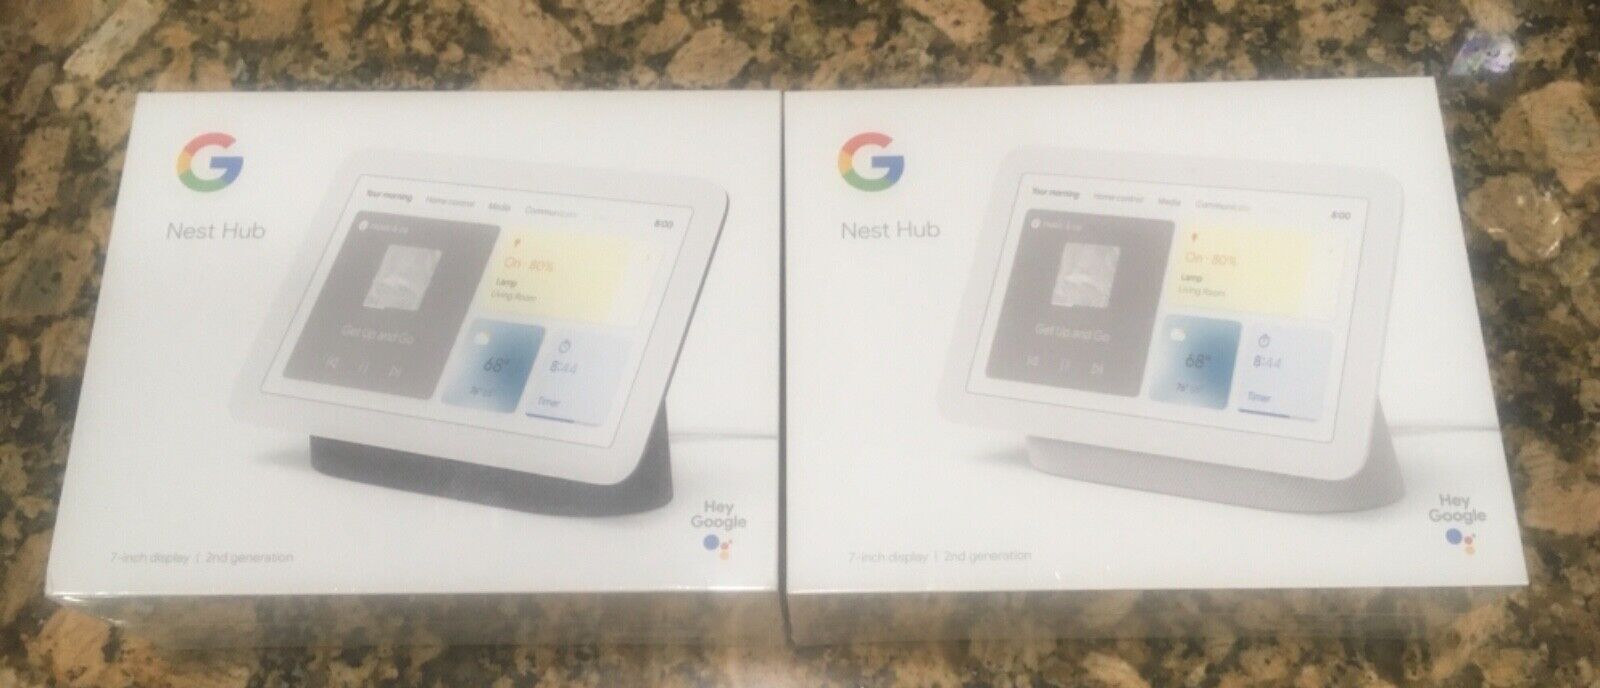 Brand New Nest Hub 7" Smart Display With Google Assistant - Charcoal Or Chalk